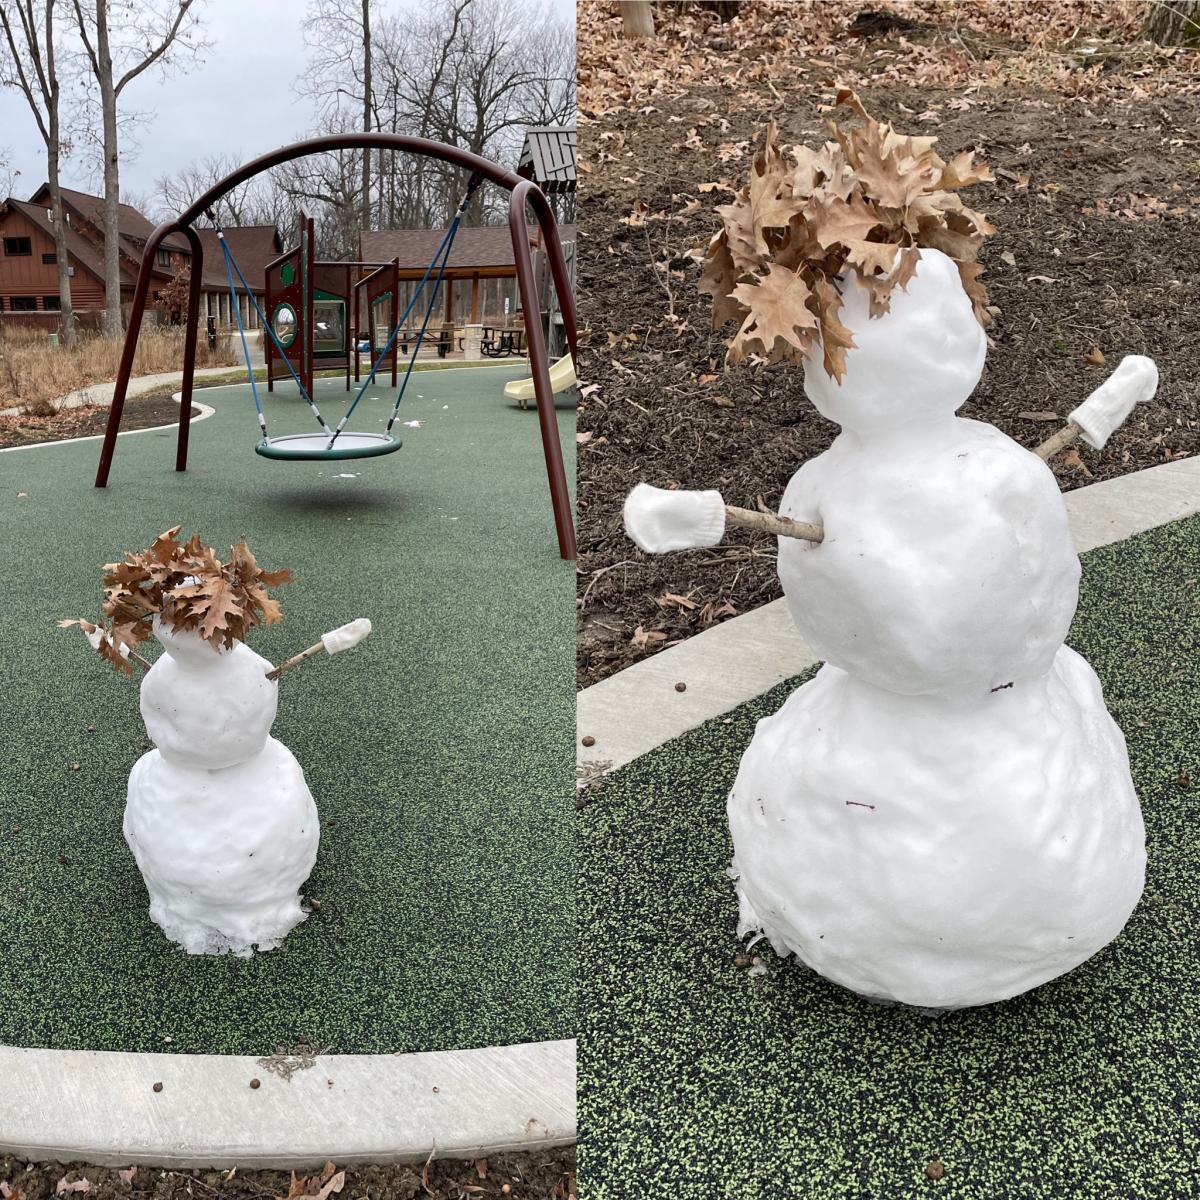 Snowperson at the playground